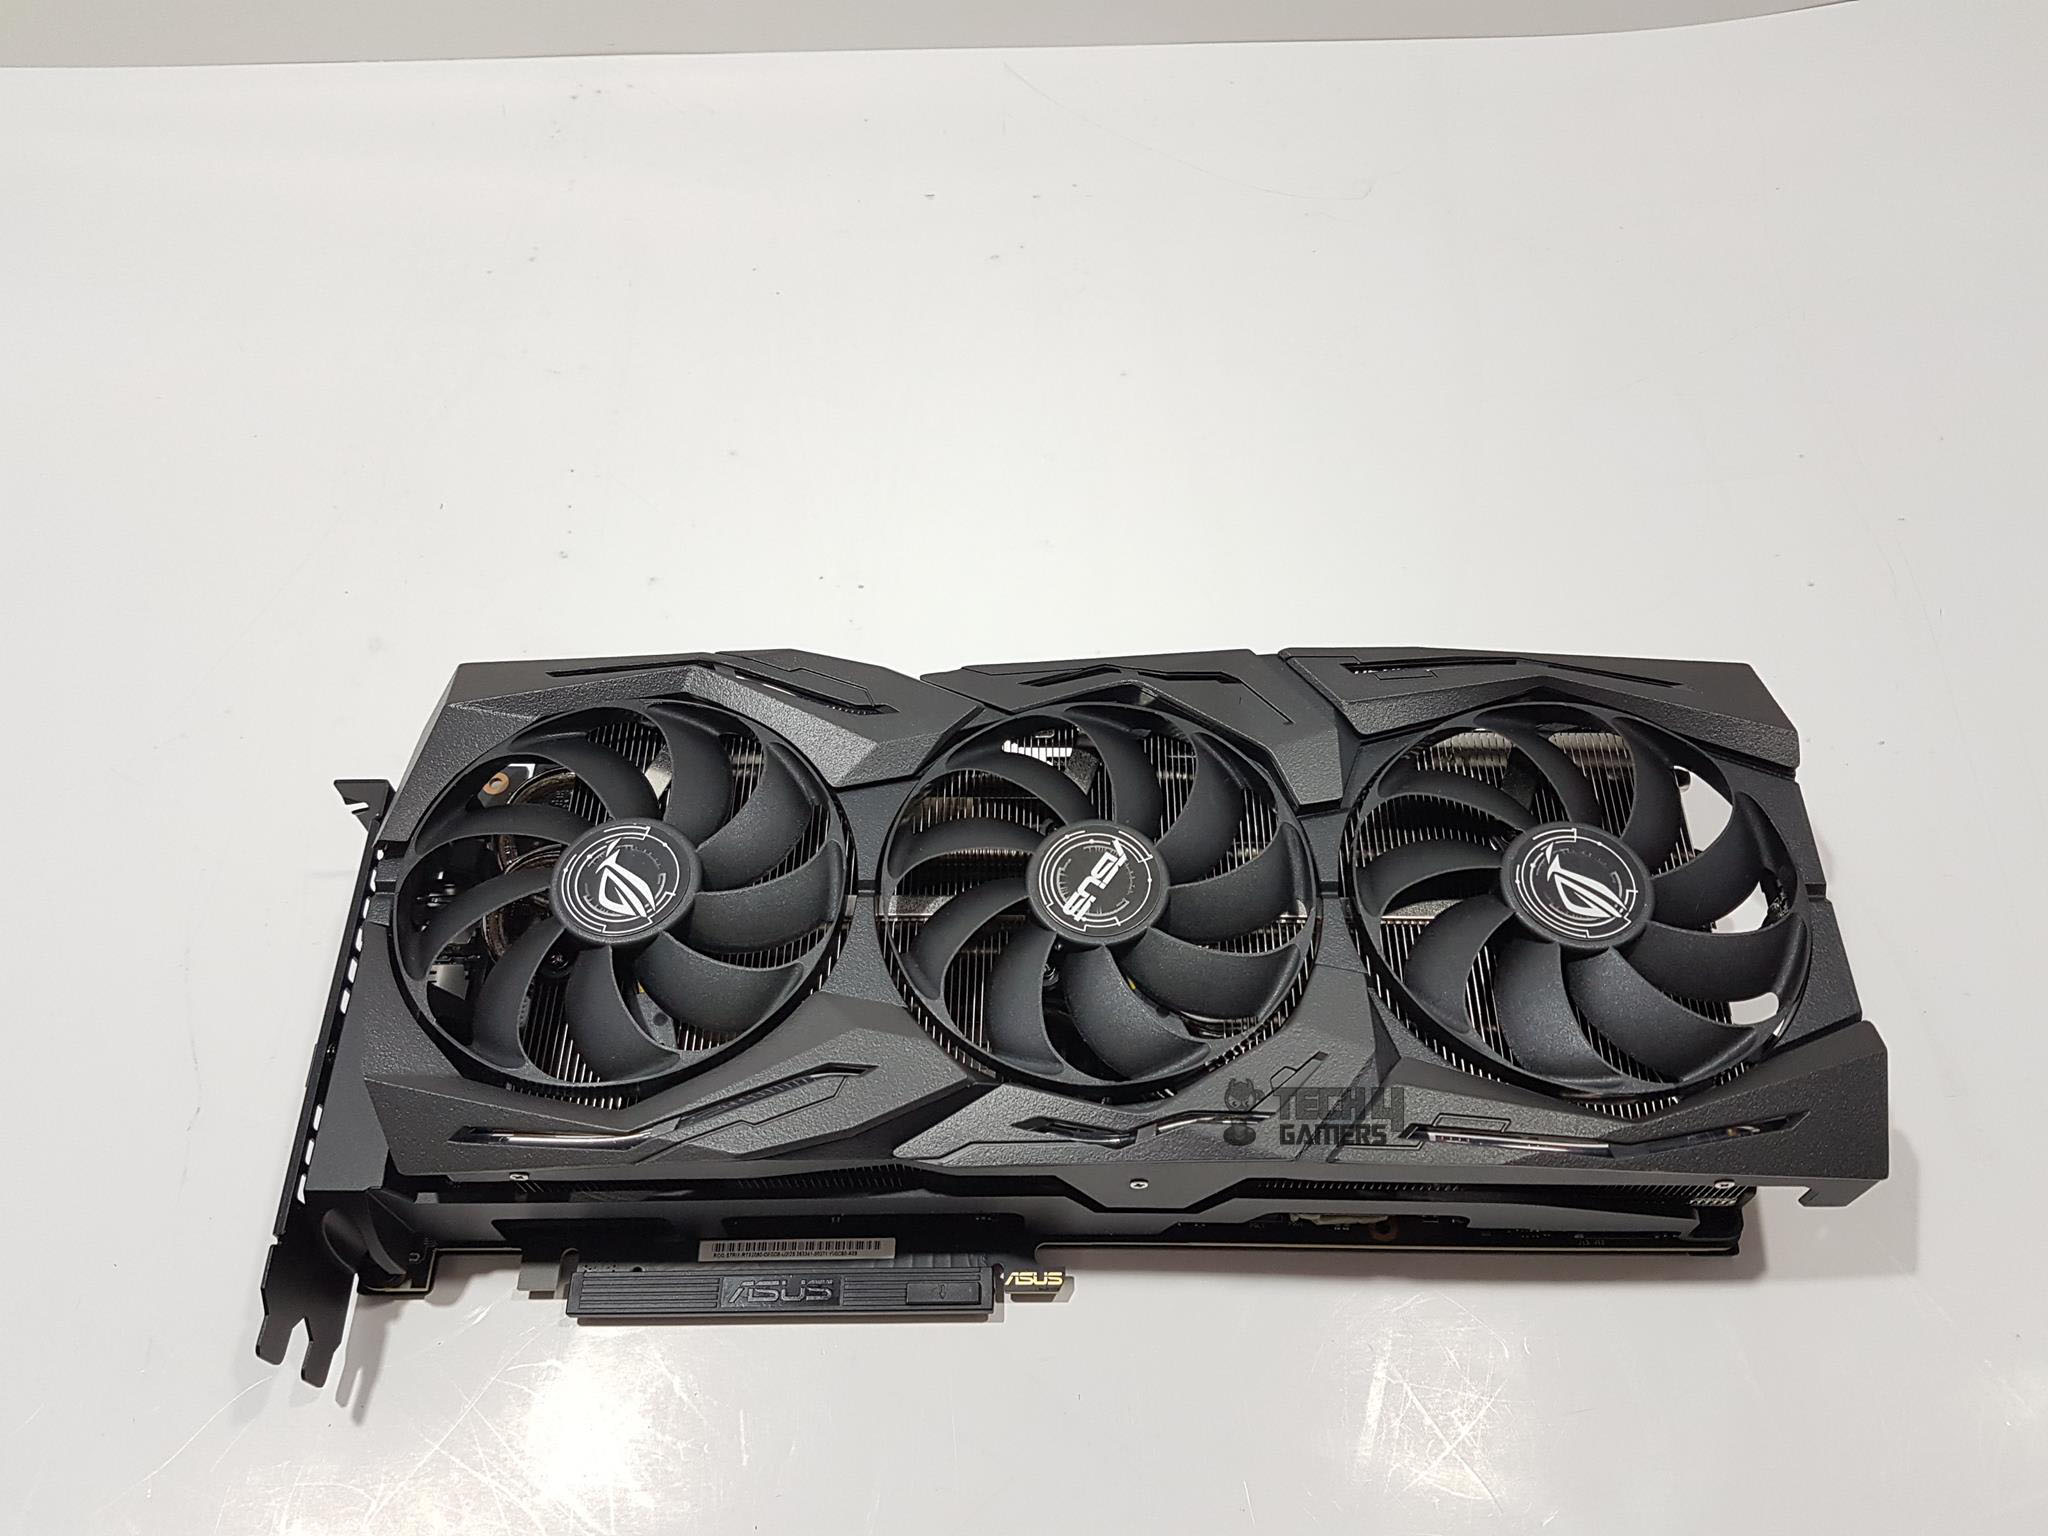 Asus Strix GeForce RTX 2080Ti O11G Graphics Card Review